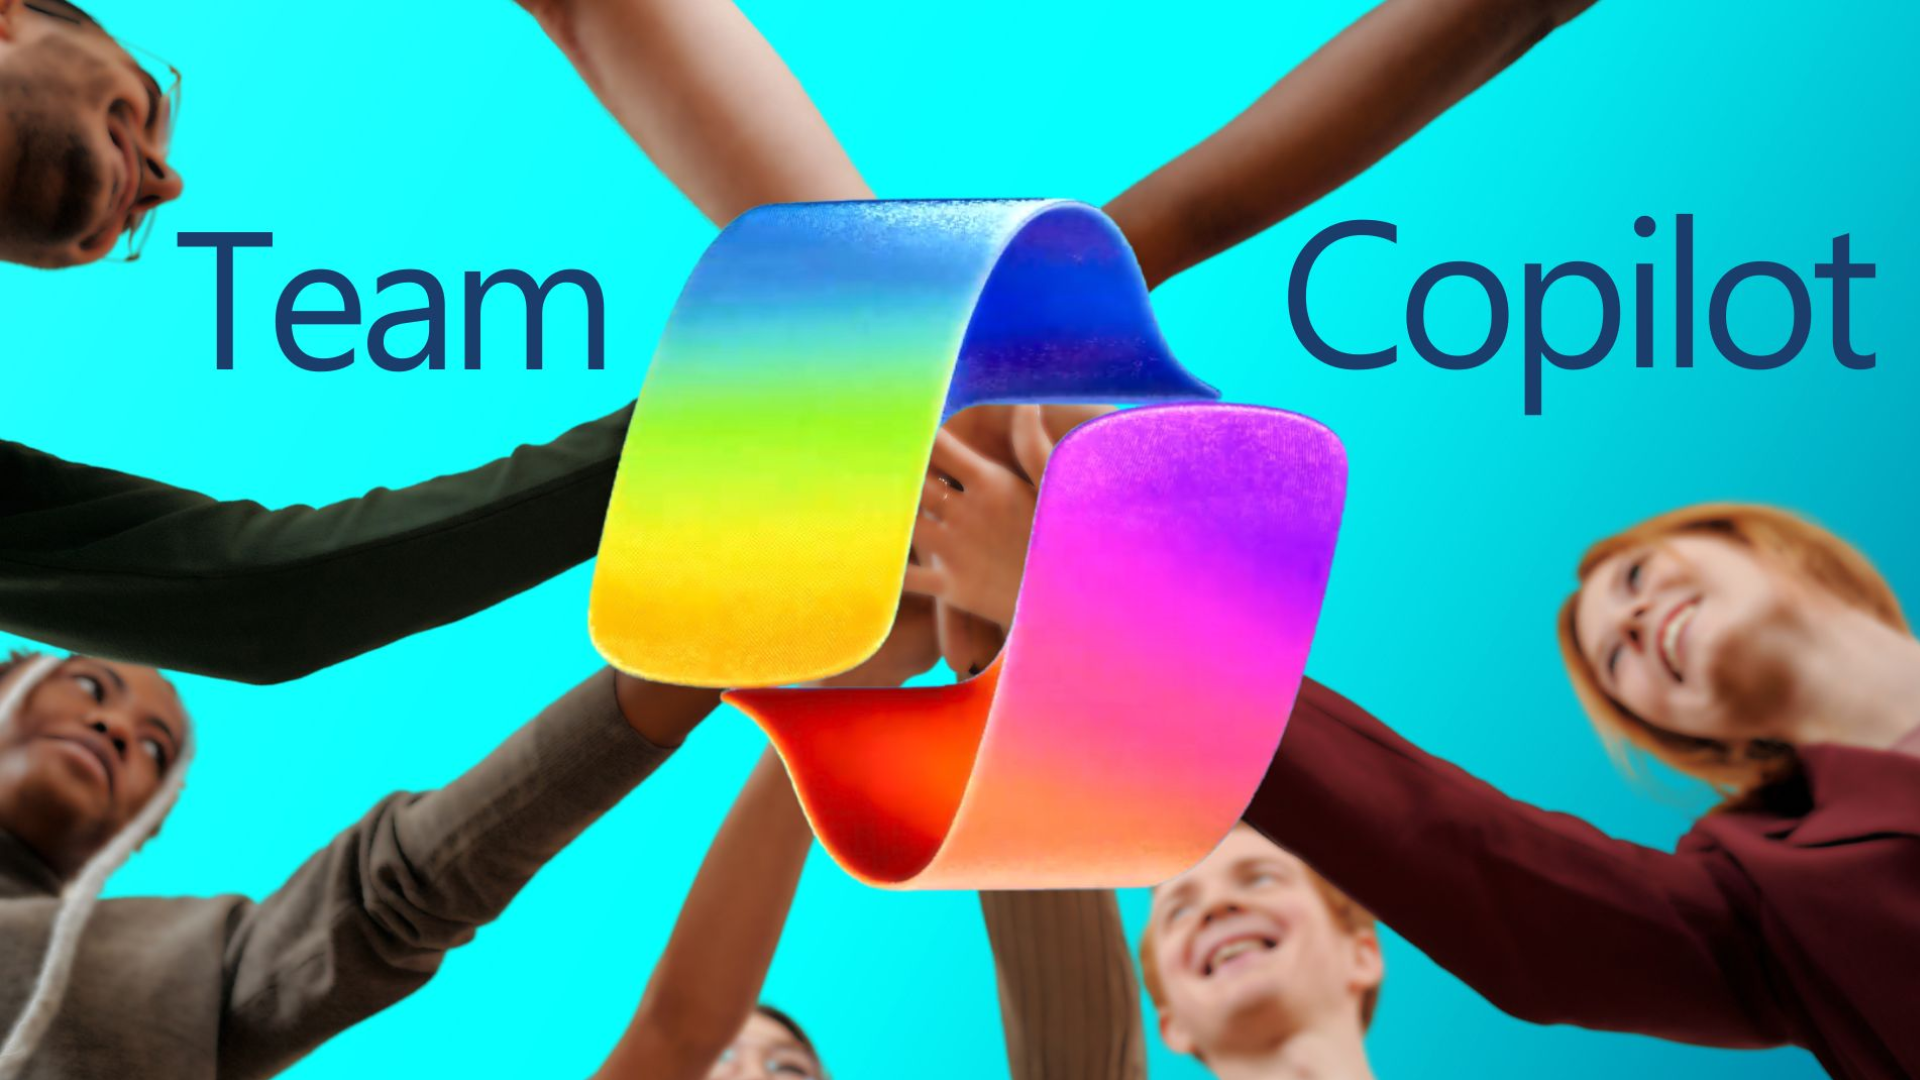 Now Copilot’s going to make your team work better together